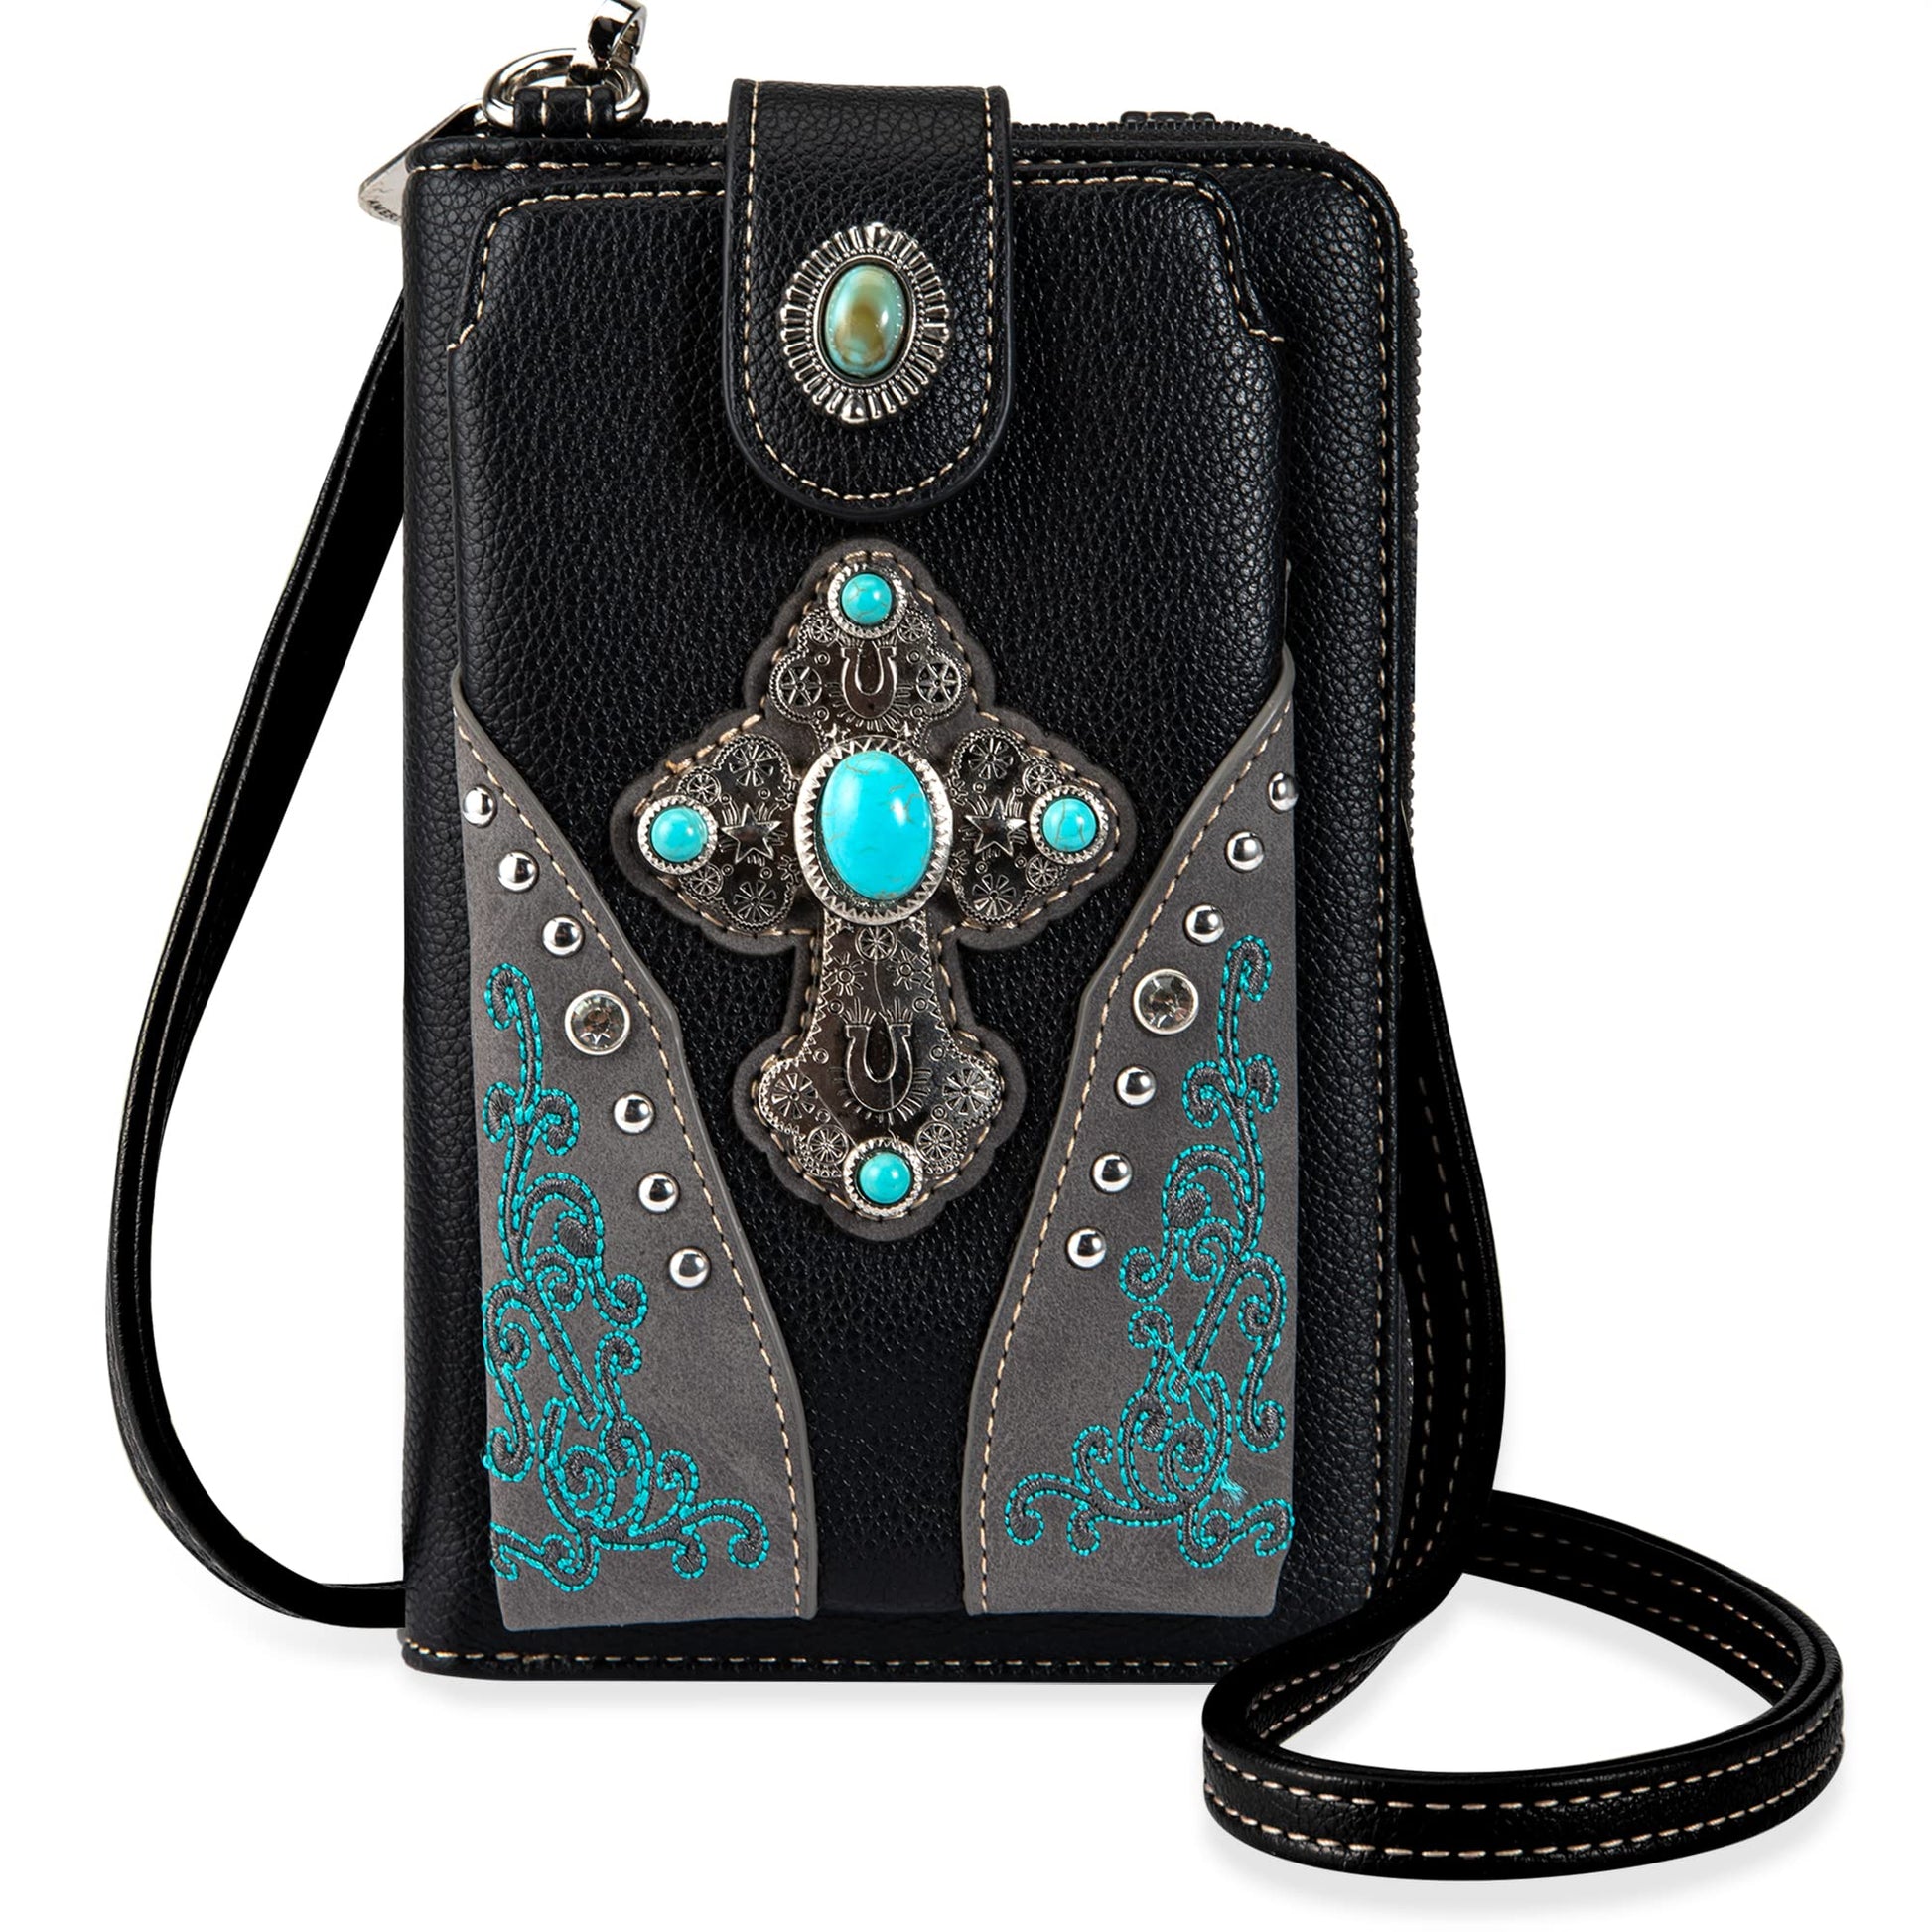 Montana West Crossbody Cell Phone Purse For Women Western Style Cellphone Wallet Bag Travel Size With Strap PHD-112BK